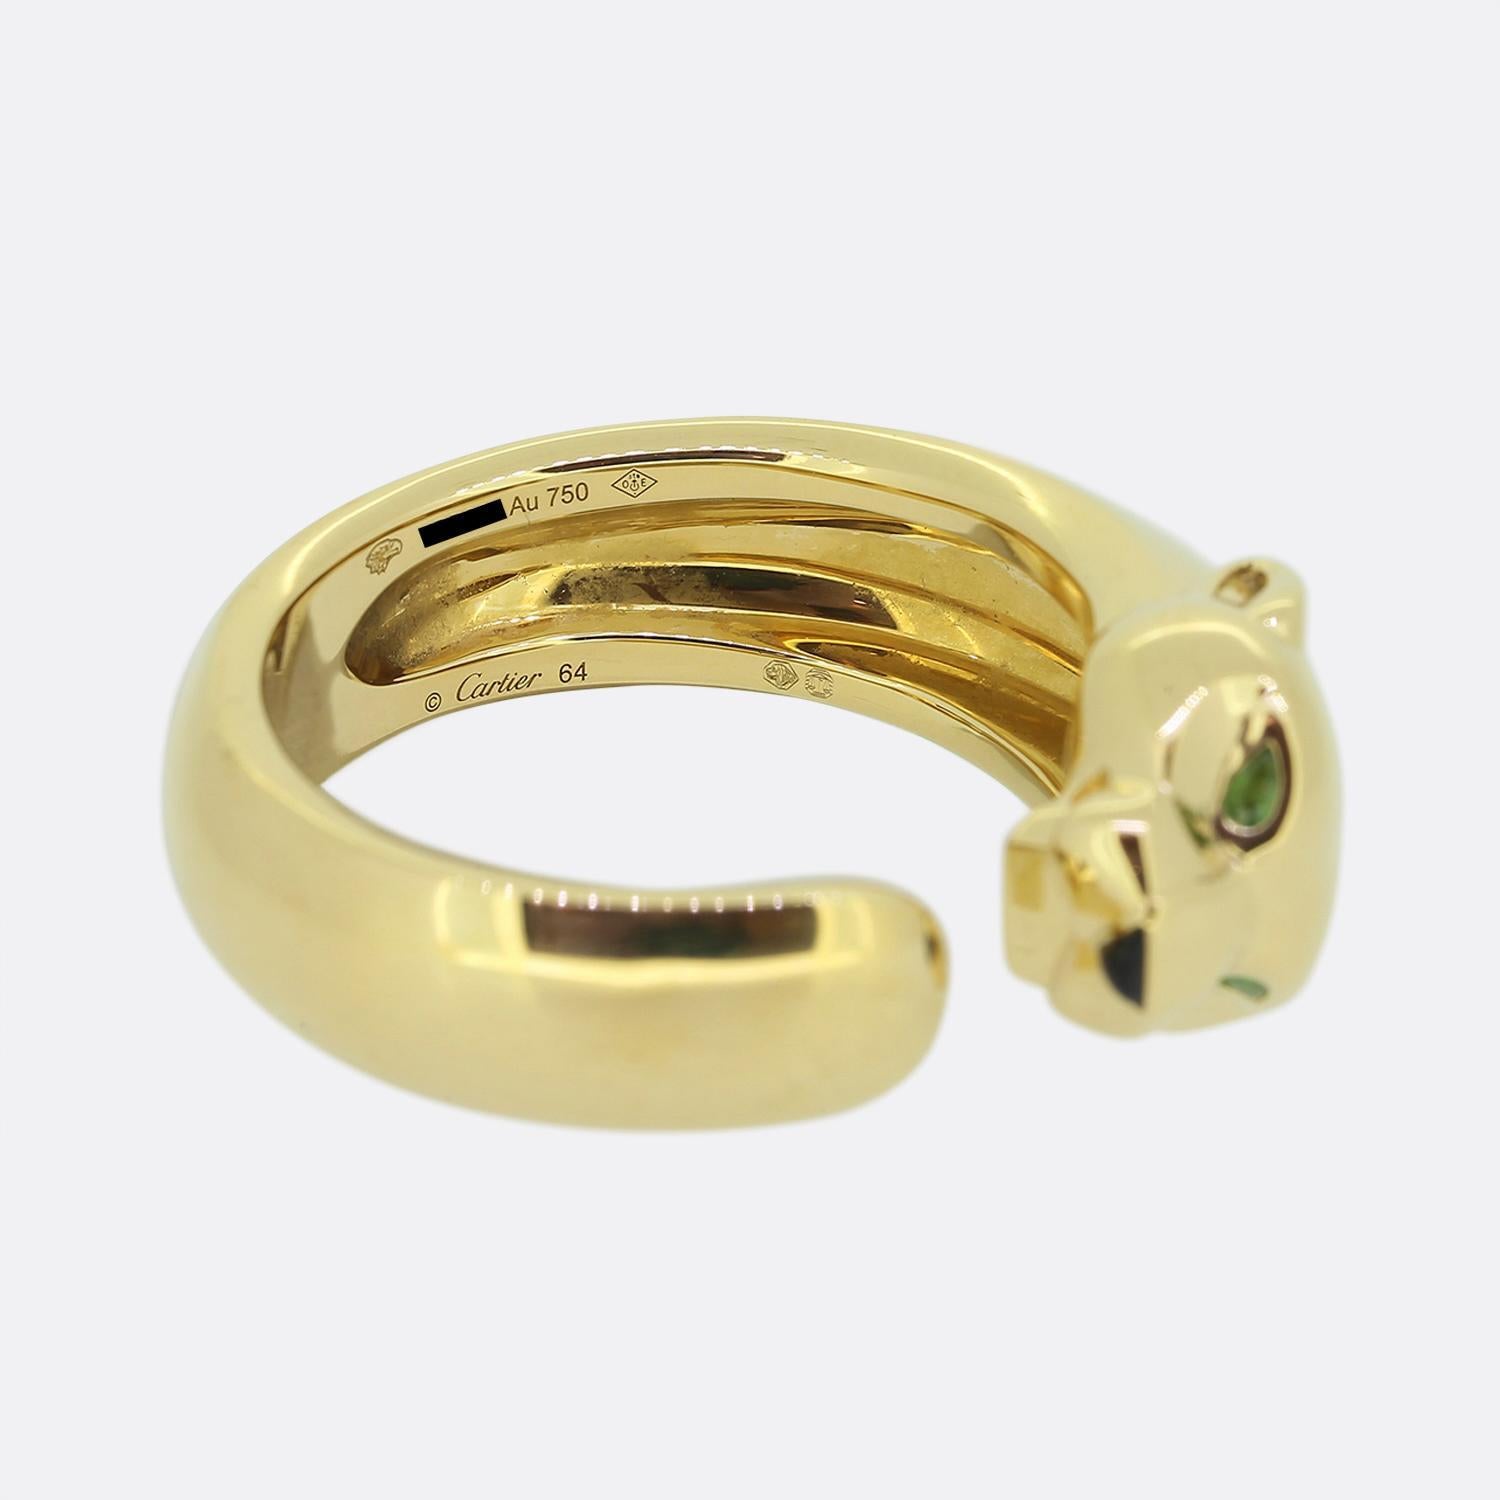 Cartier Massai Panthère Ring Size V 1/2 (64) In Excellent Condition For Sale In London, GB